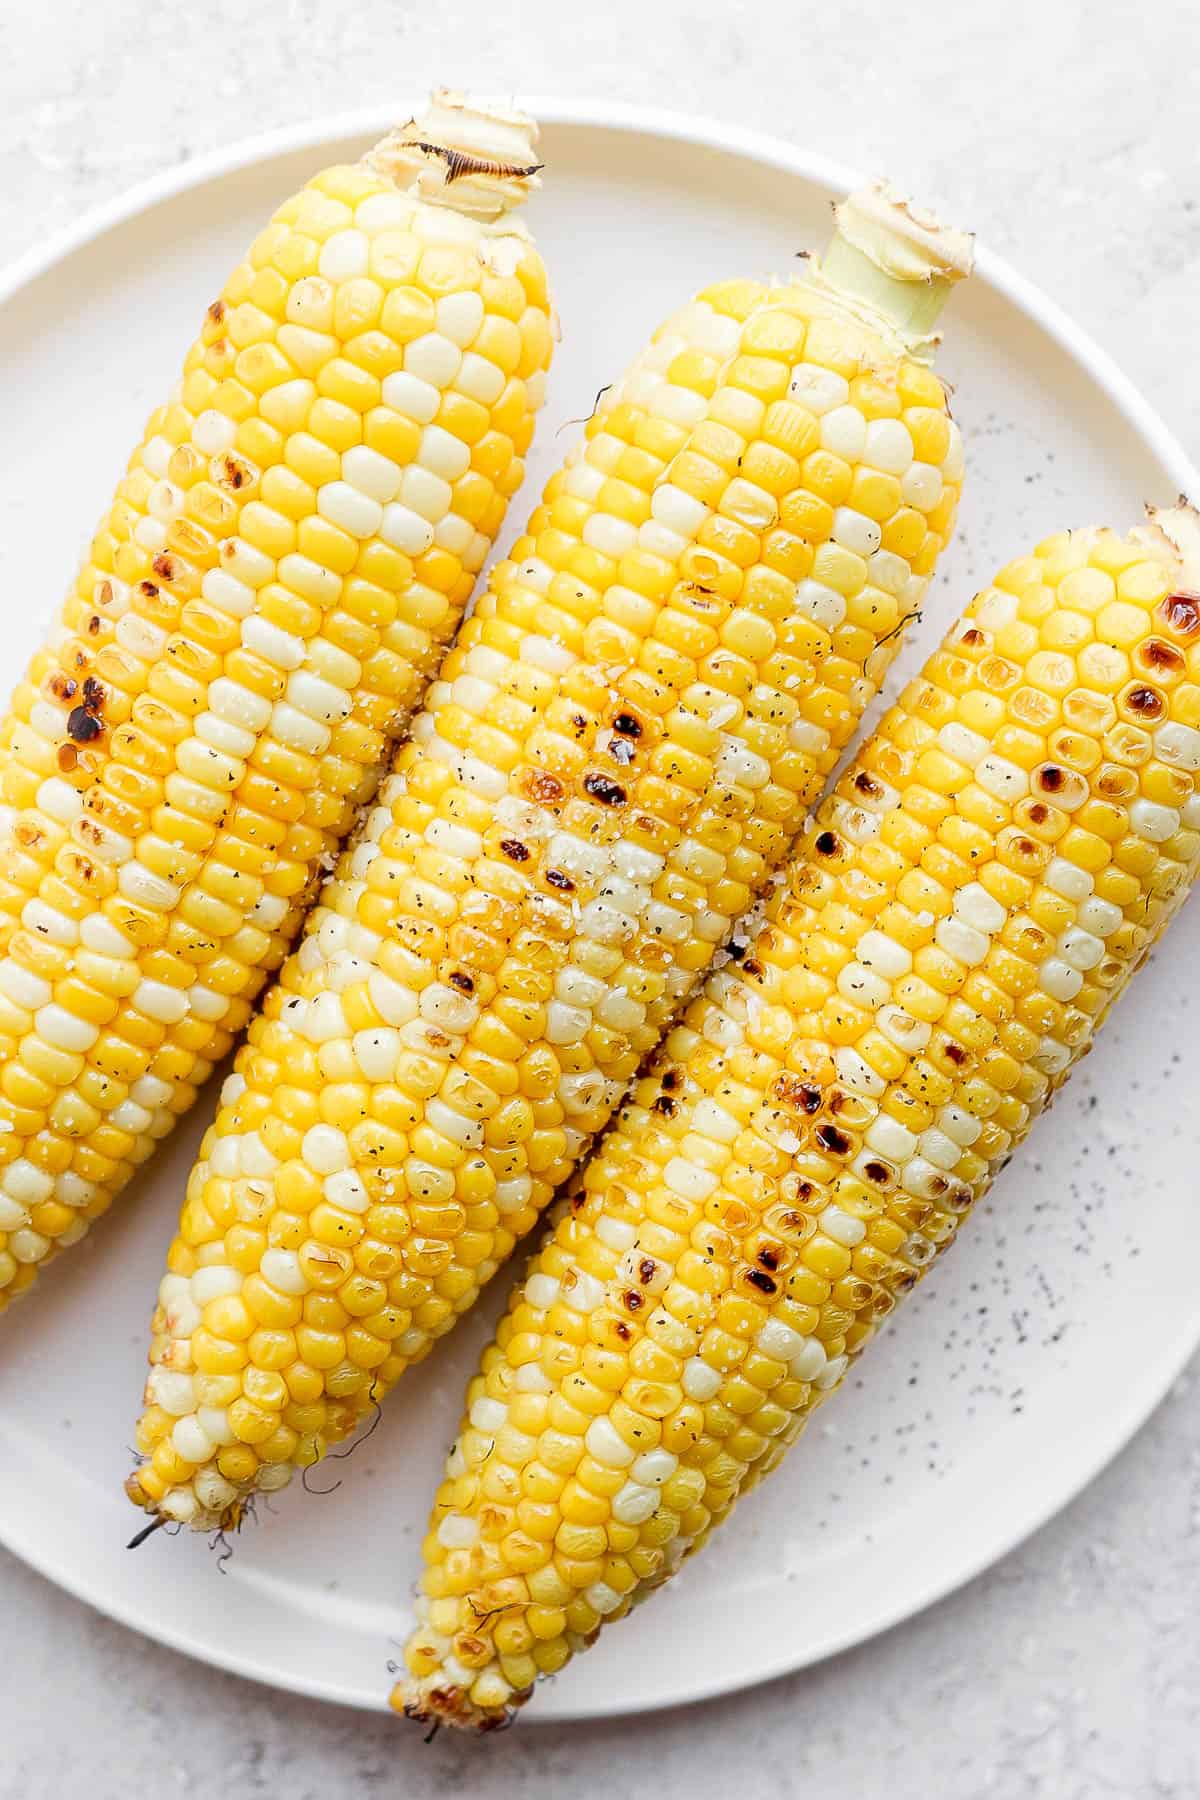 Grilled ears of corn on a white plate.